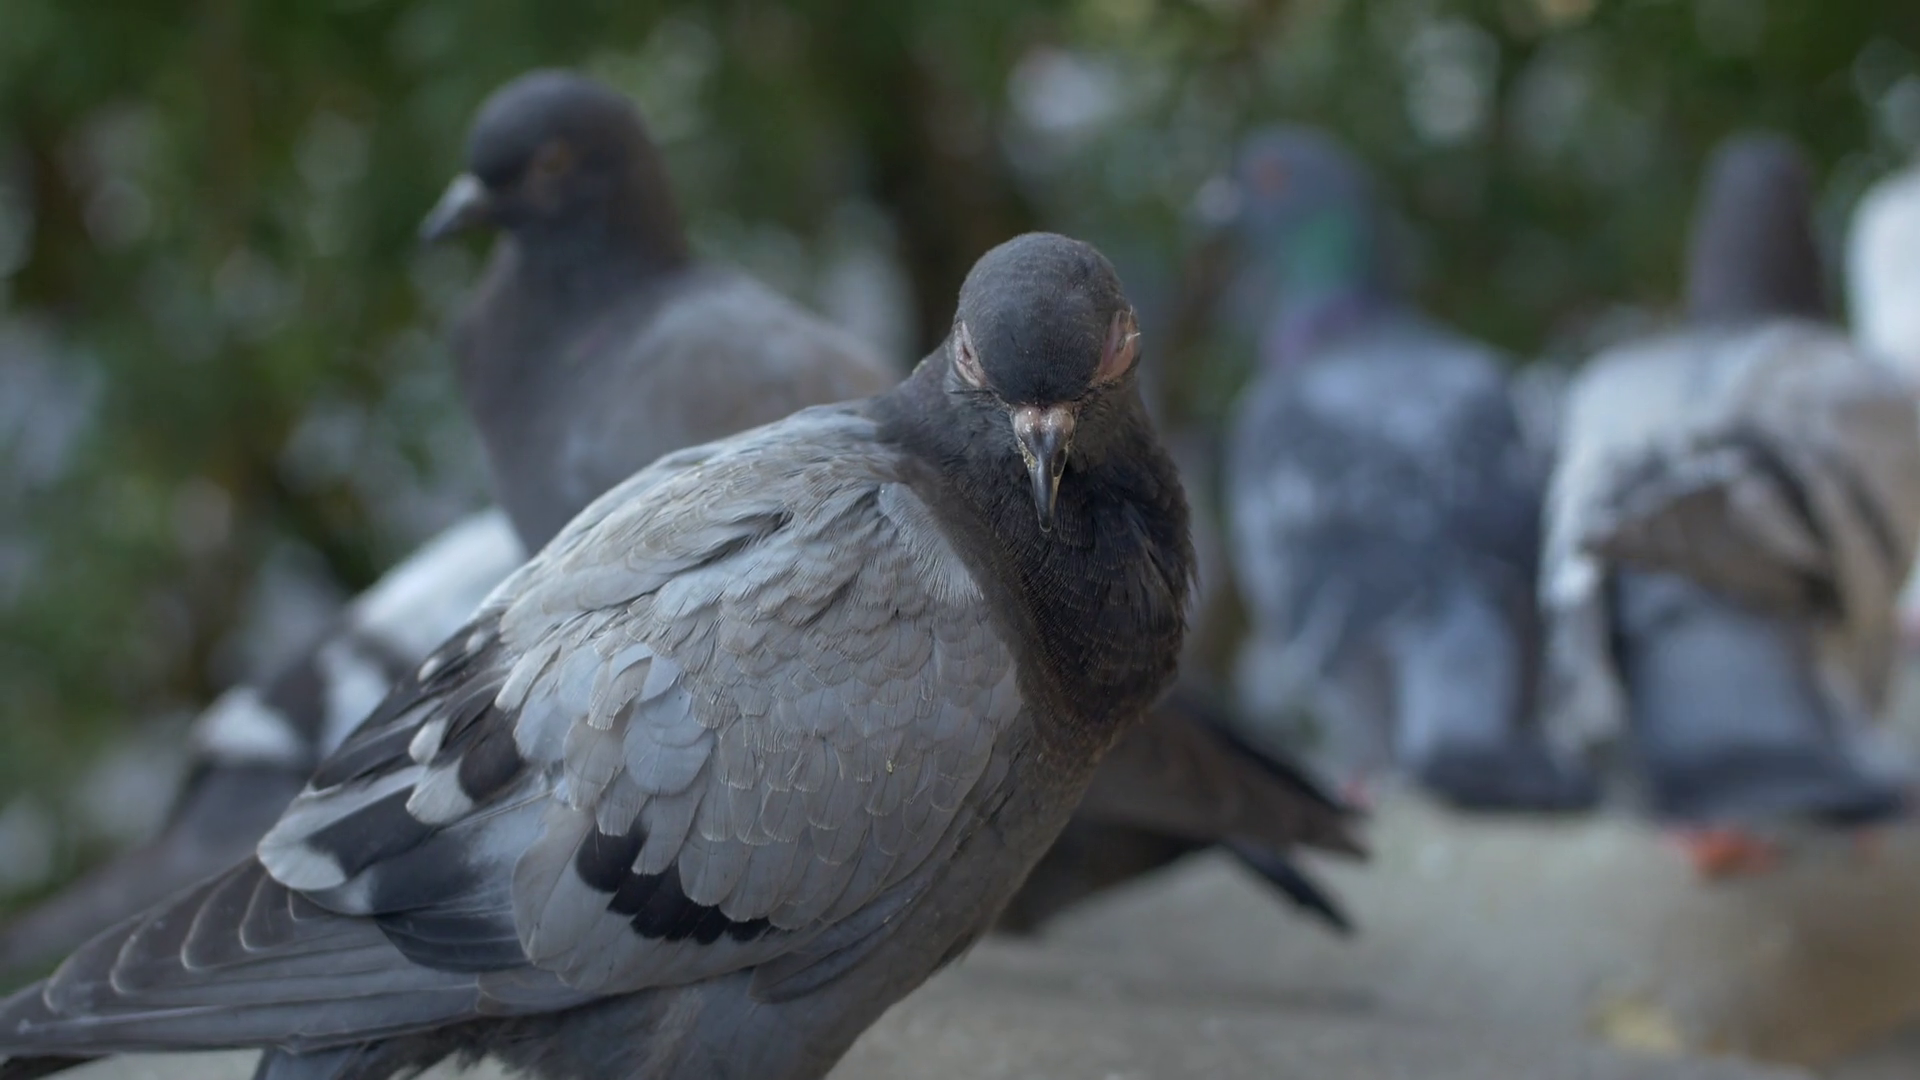 Pigeons eating food from grounds hundreds of birds feeding flock of ...